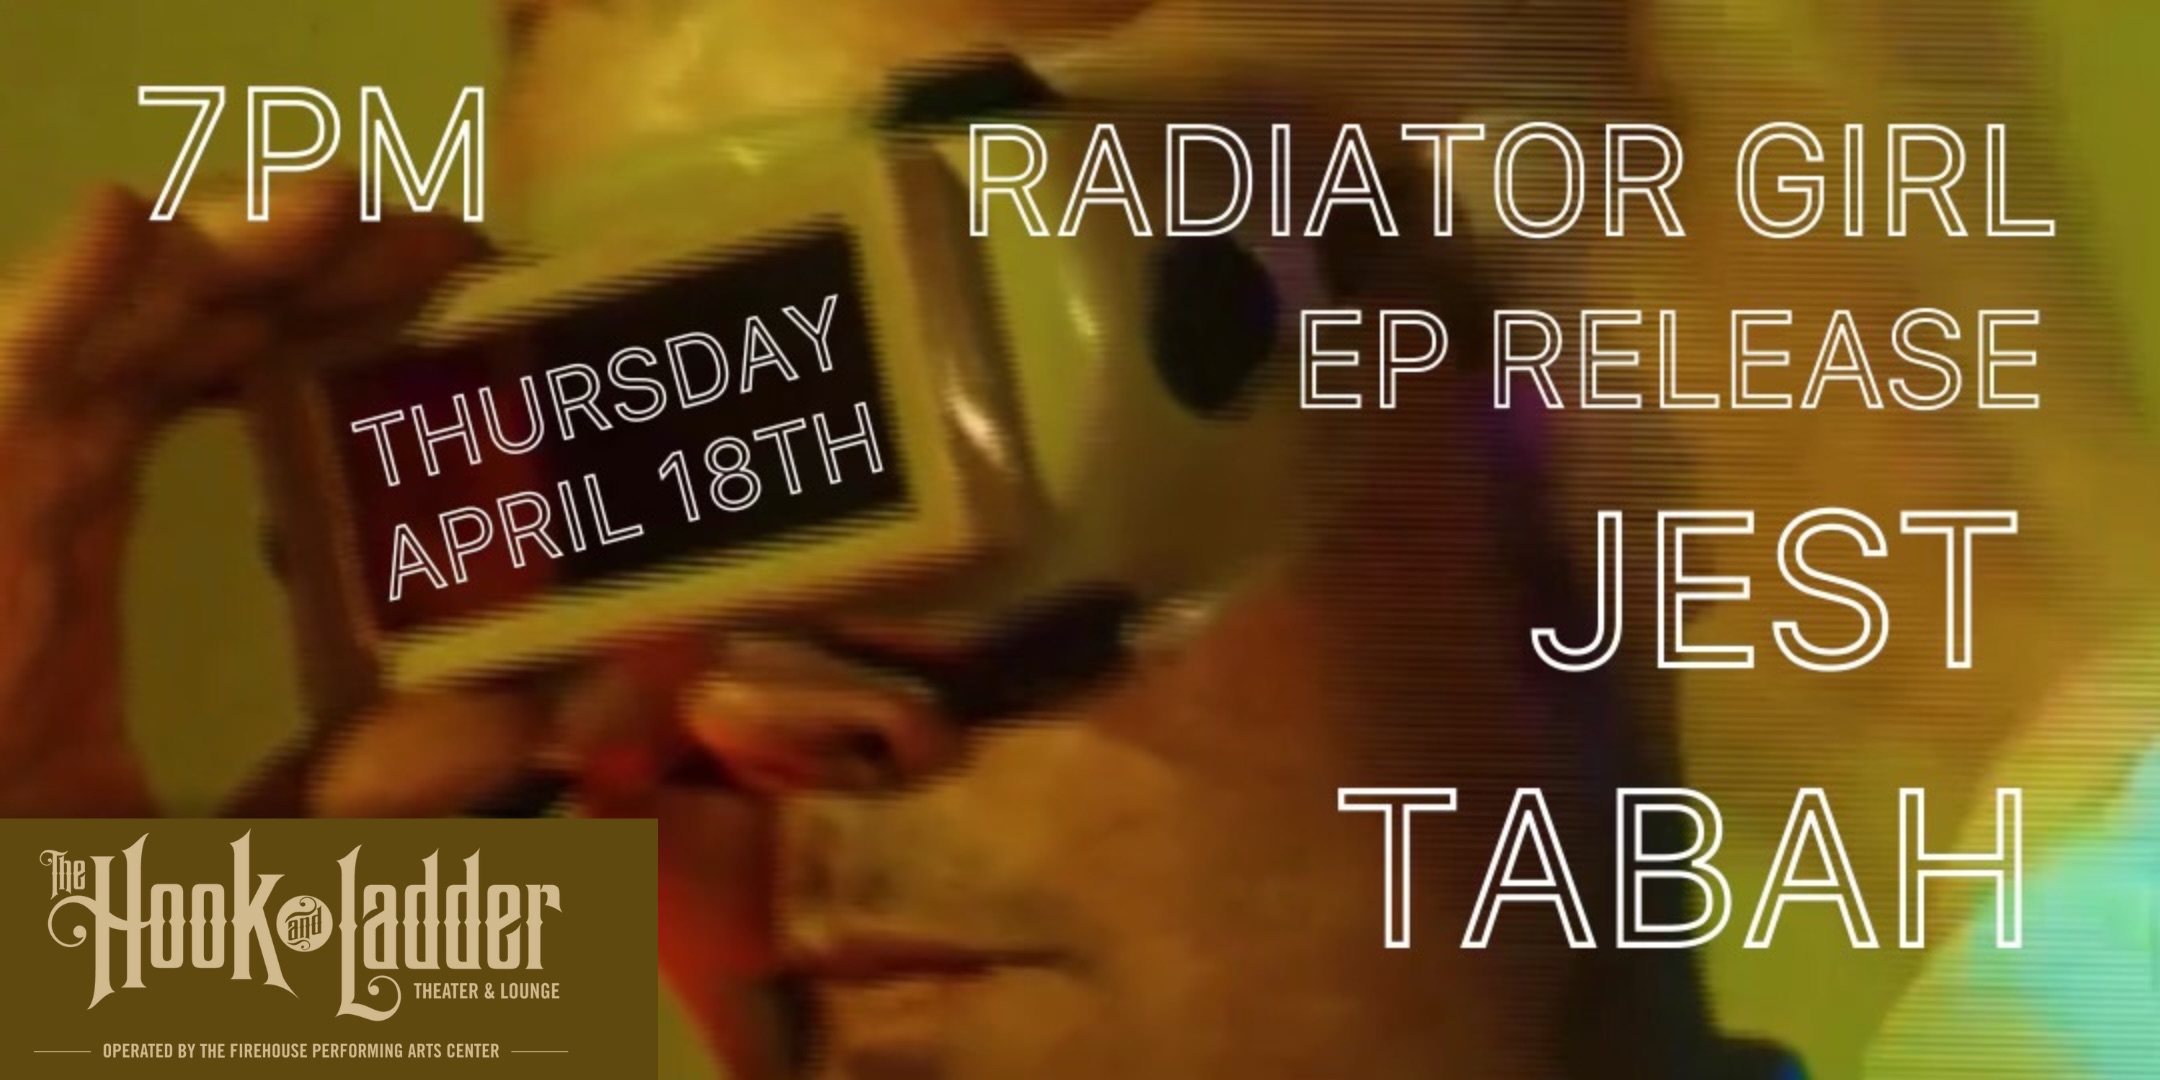 Radiator Girl EP Release Show with Jest and TABAH Thursday, April 18 The Mission Room at The Hook and Ladder Theater Doors 7:00pm :: Music 7:30pm :: 21+ $10 ADV / $15 DOS